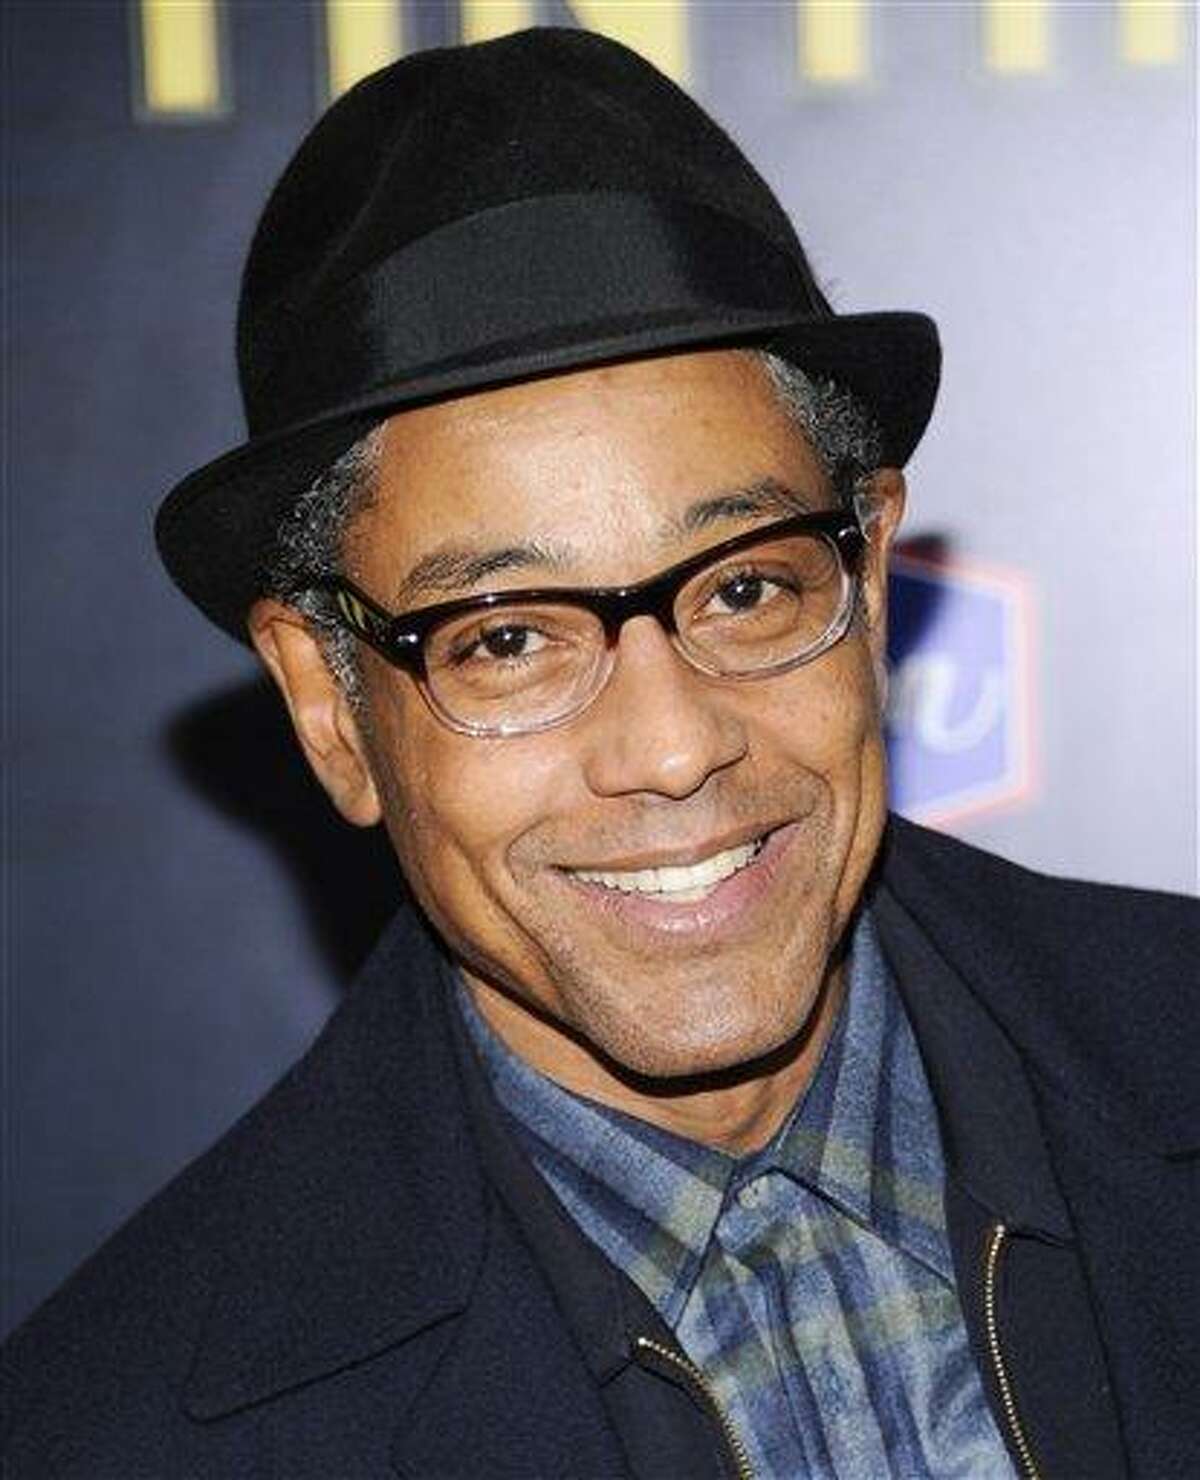 In this file photo, actor Giancarlo Esposito attends the premiere of "The Adventures of Tintin" at the Ziegfeld Theatre in New York. Esposito, Bob Dishy, Zach Grenier, Ron Cephas Jones and Tonya Pinkins will star in "Storefront Church," the final piece in John Patrick Shanley's "Church and State" trilogy of plays. Previews begin on May 16 off-Broadway. (AP Photo/Evan Agostini, file)